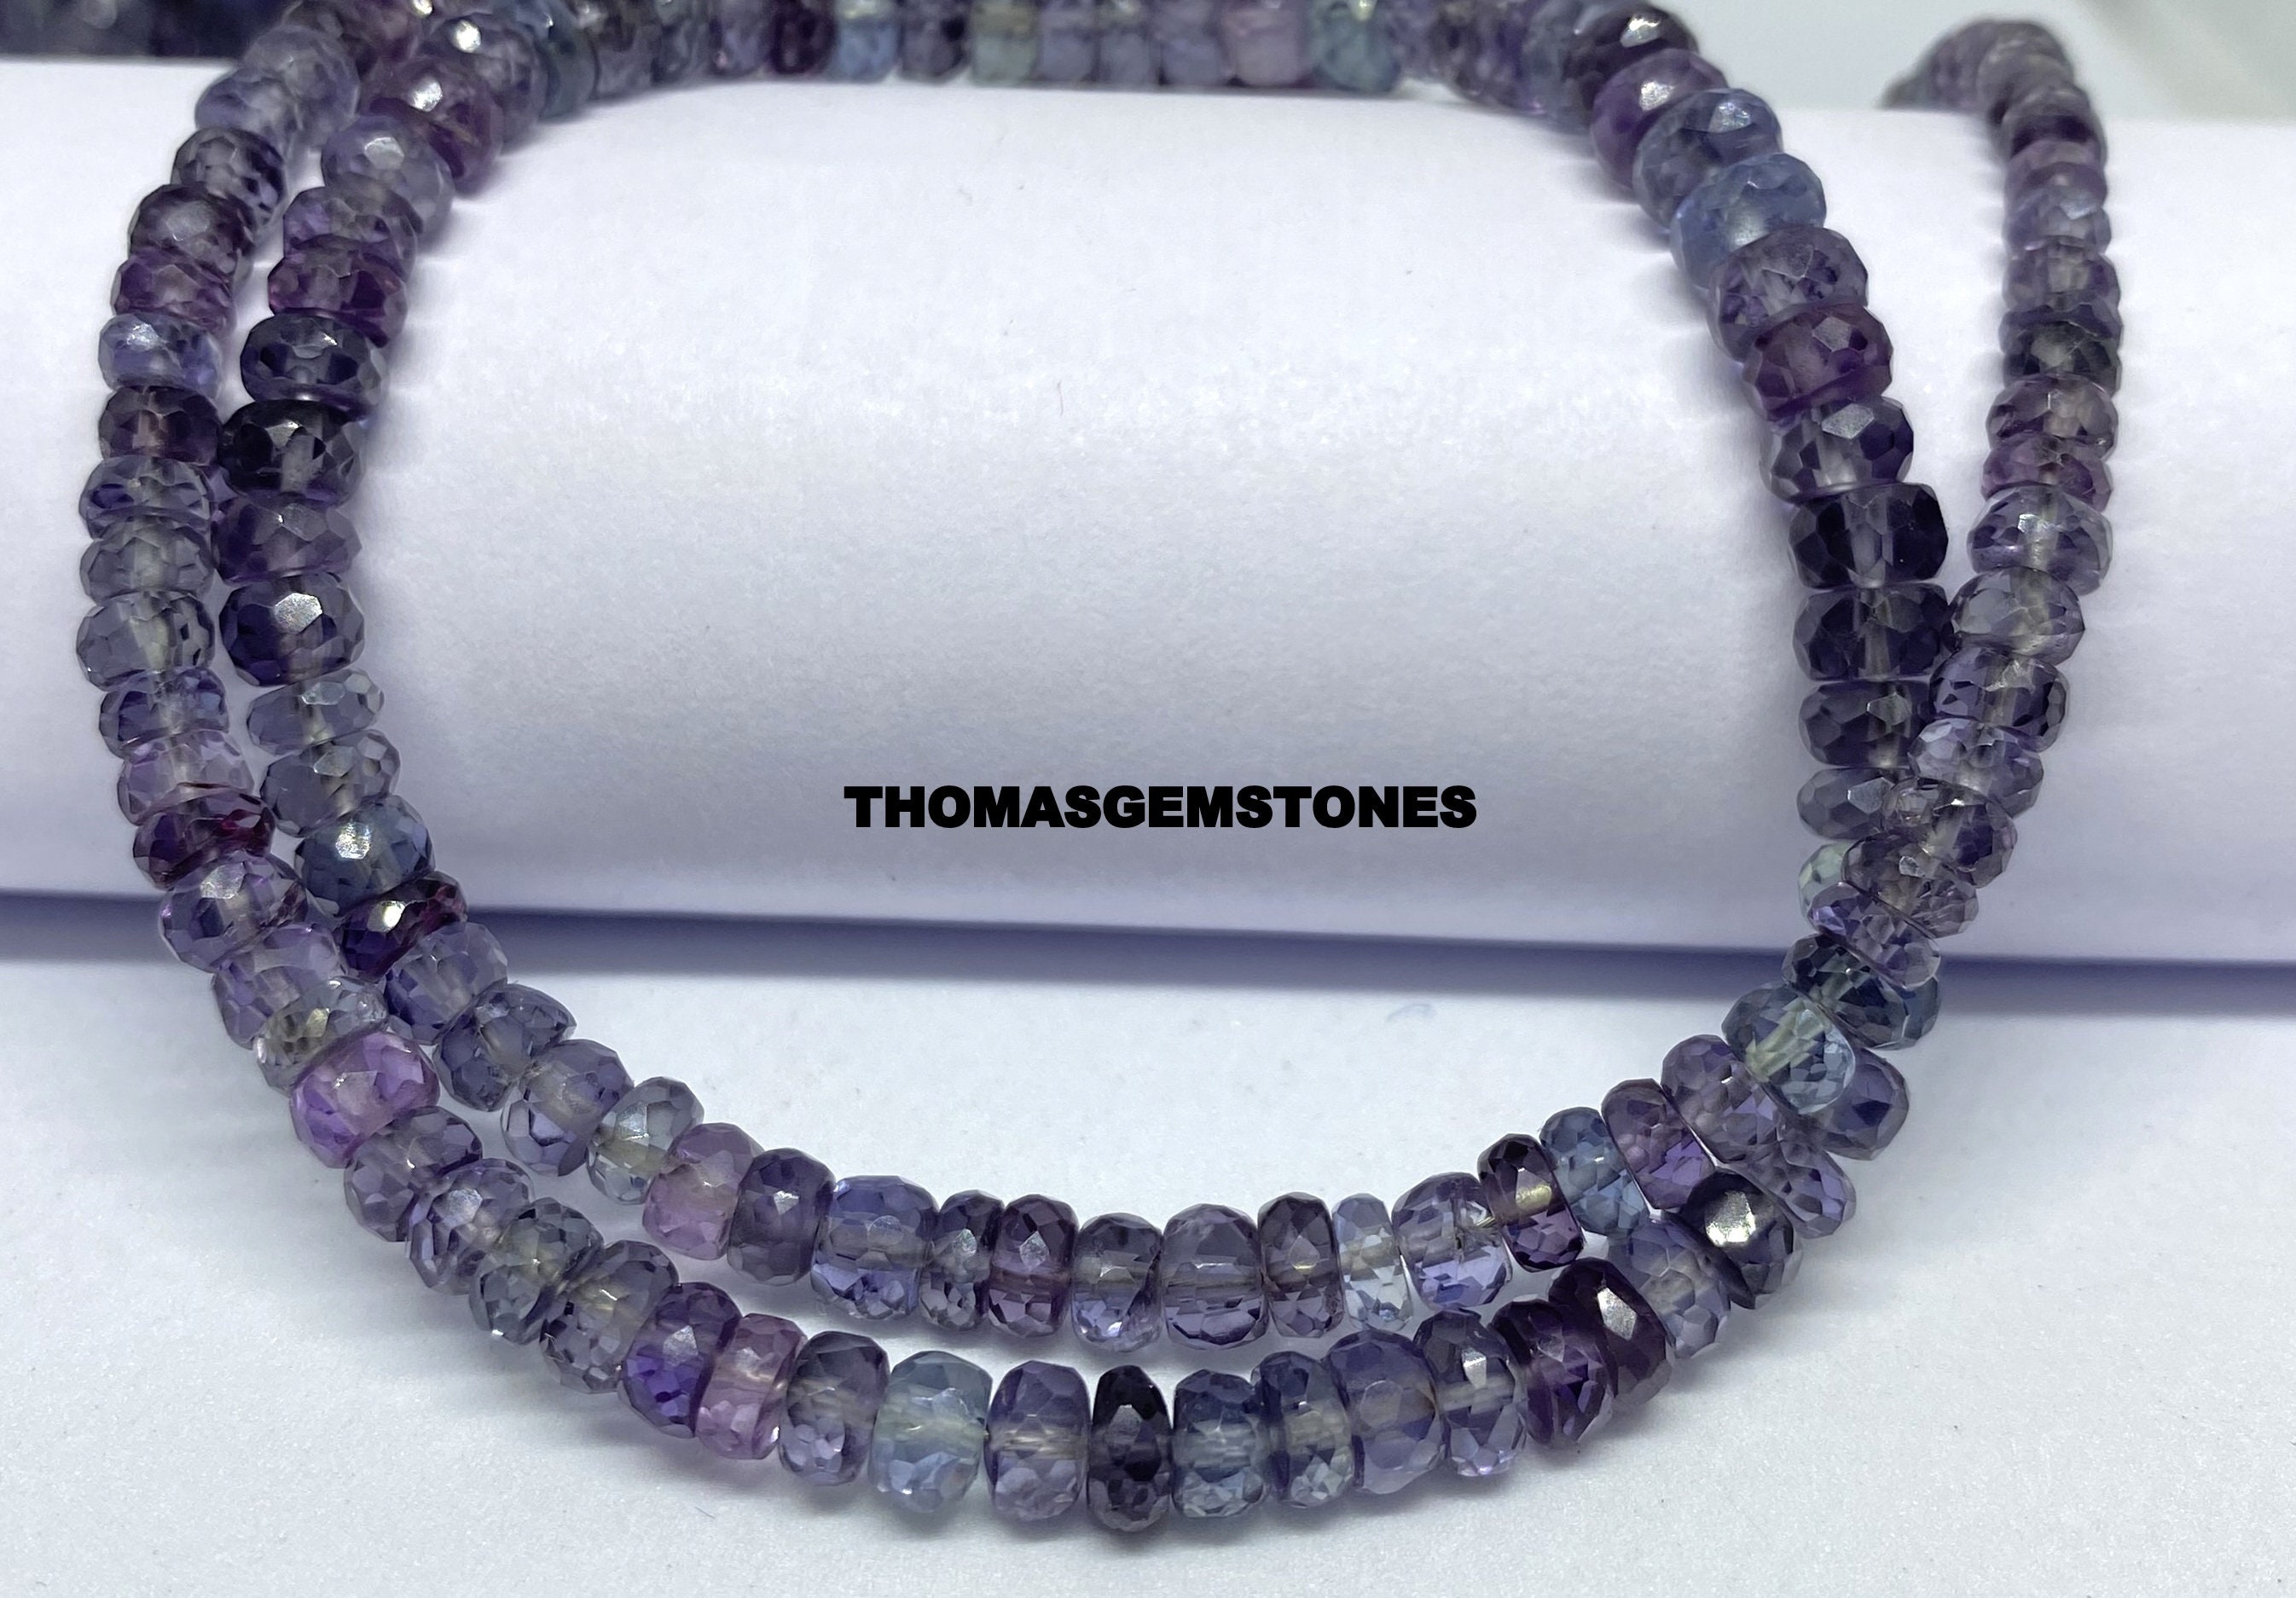 AAAA++ Rare Alexandrite Beads Sparkling Alexandrite Rondelle Faceted Beads Color Changing Alexandrite Beads Alexandrite Gemstonethumbnail